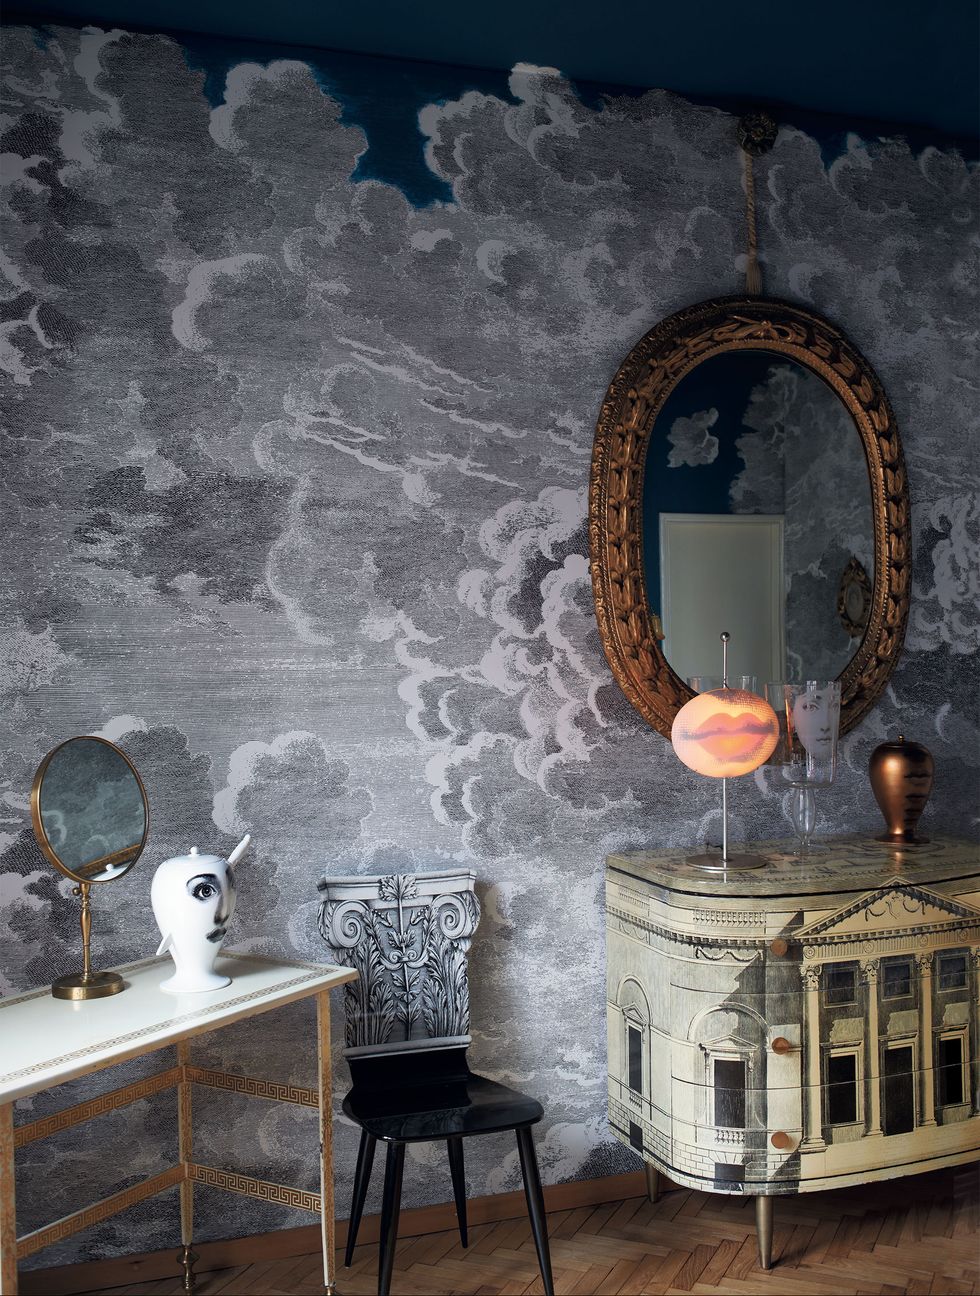 bedroom with dark wallpaper with a cloudy white print and a oval gilt mirror over a toile looking console and next to it a thing chair and table with classic objects with face designs on them